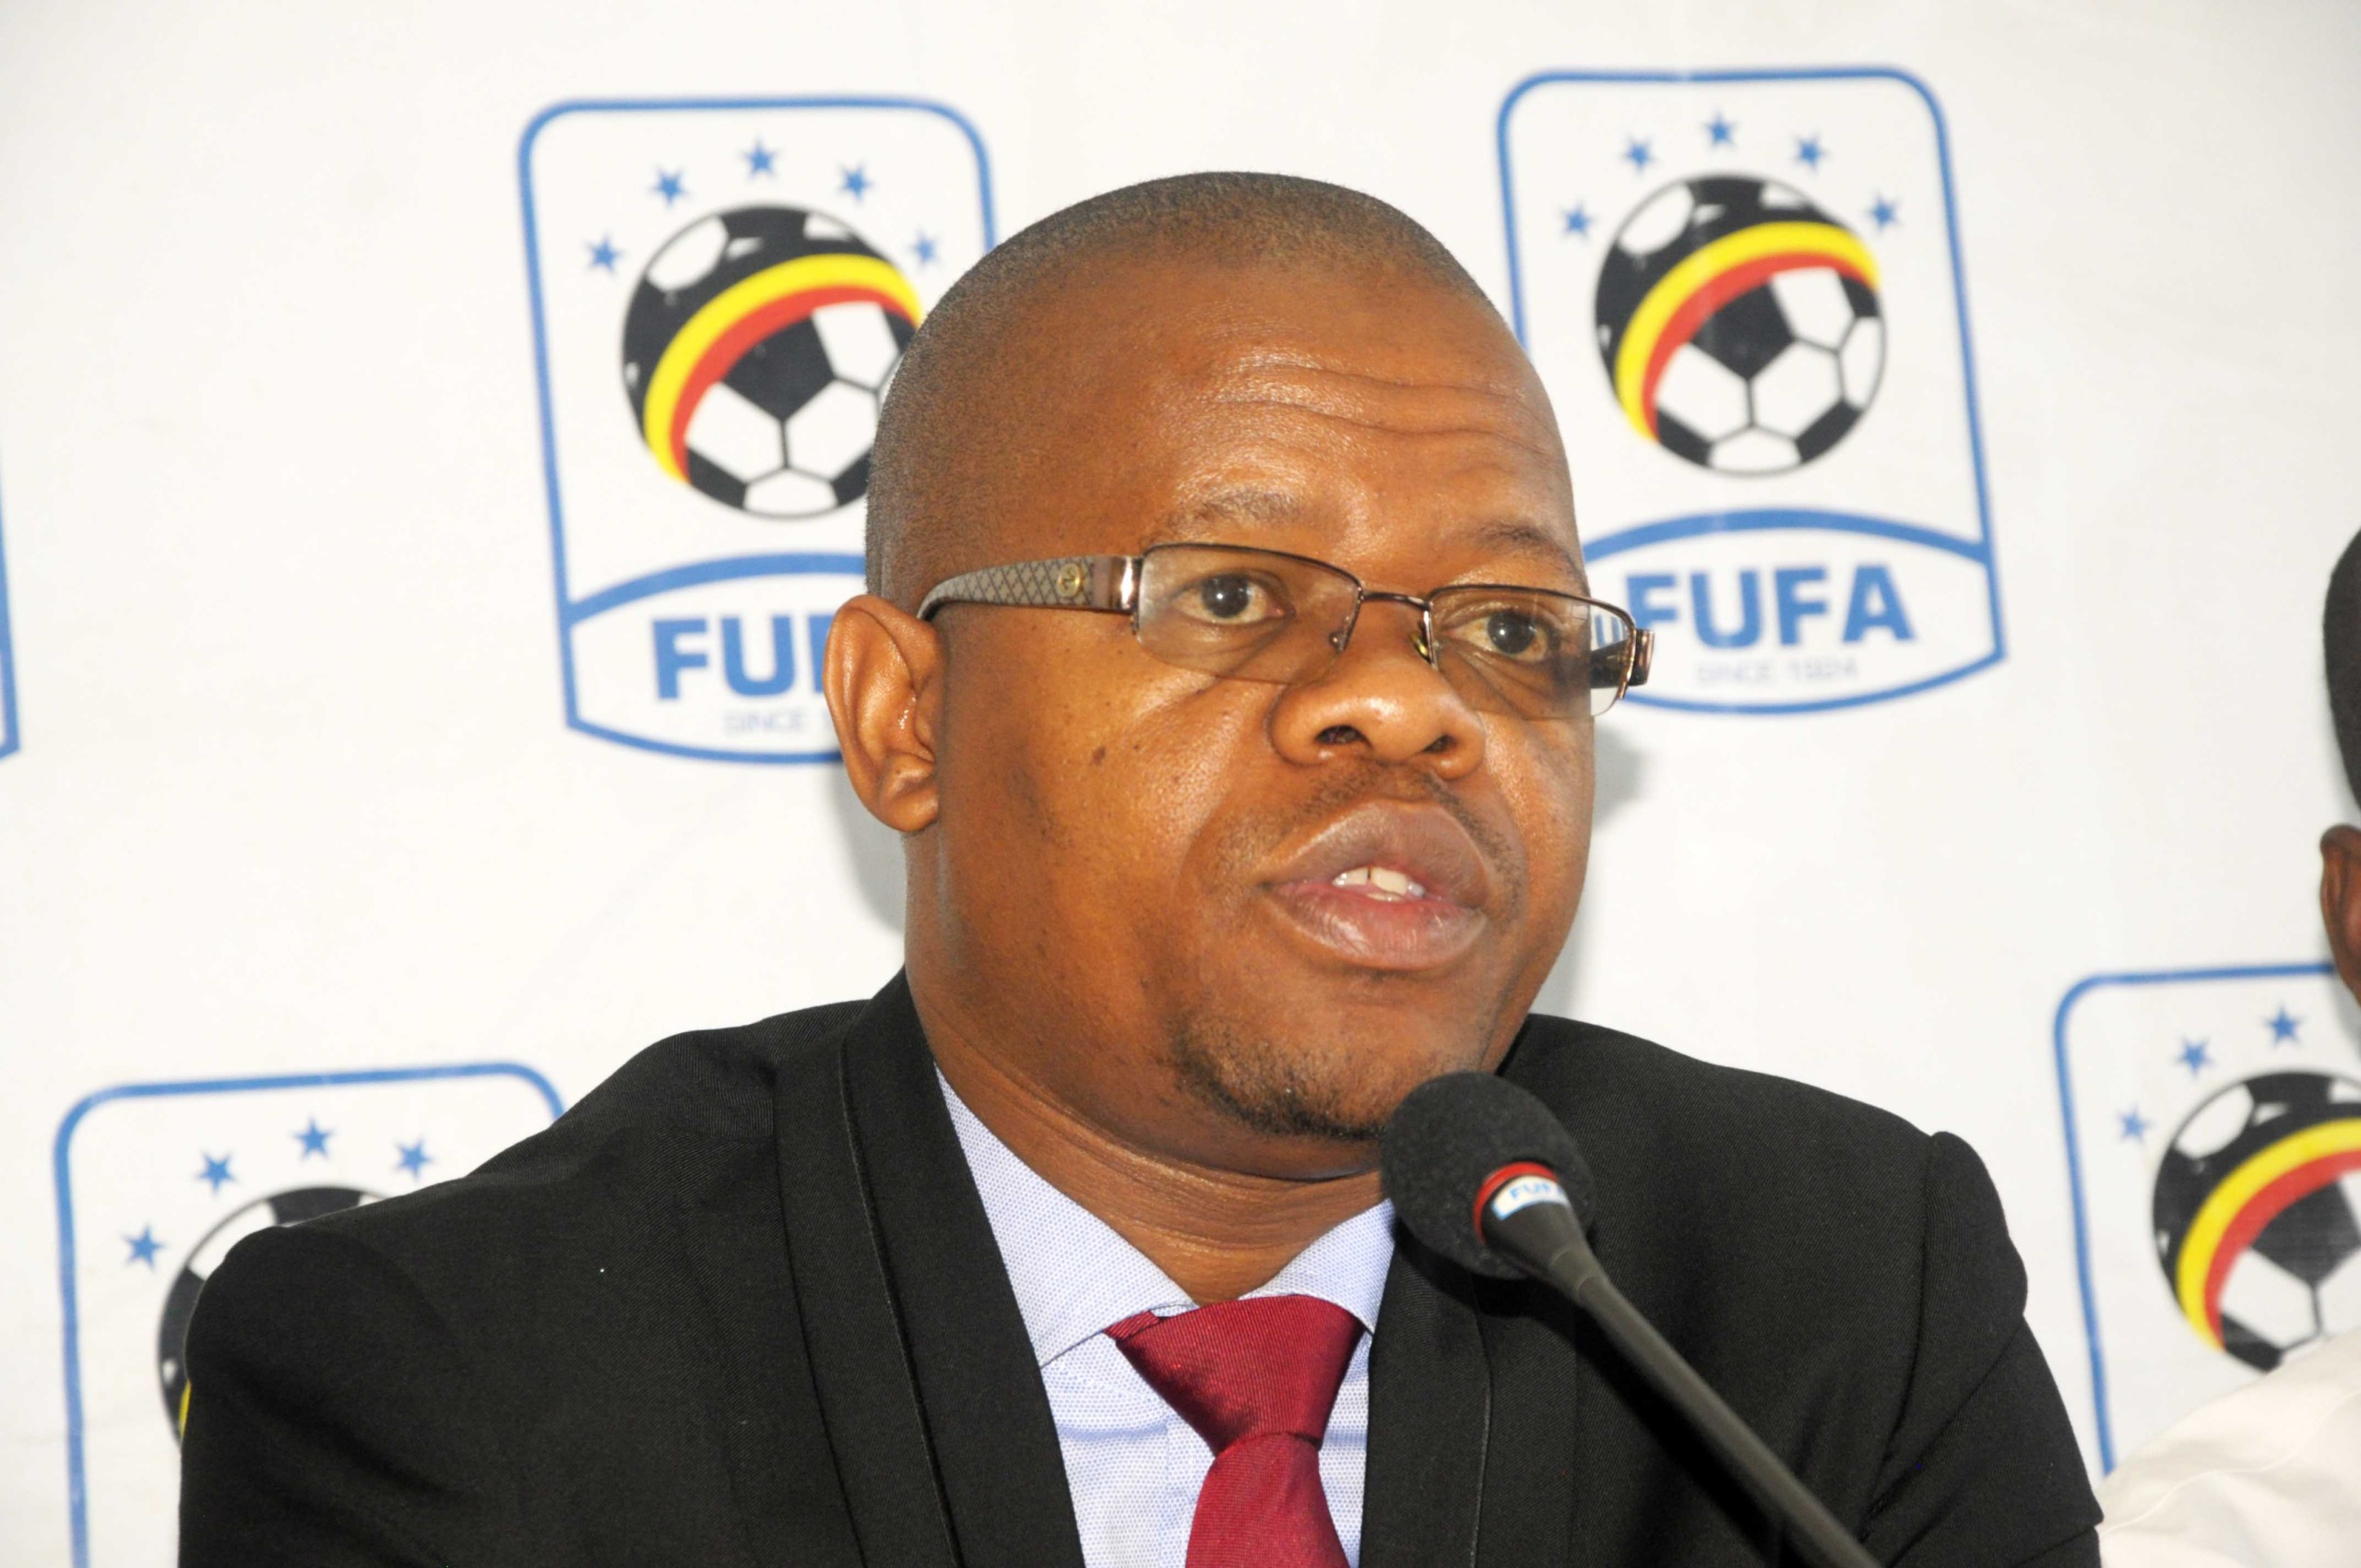 FUFA President hails media for the coverage given to women football